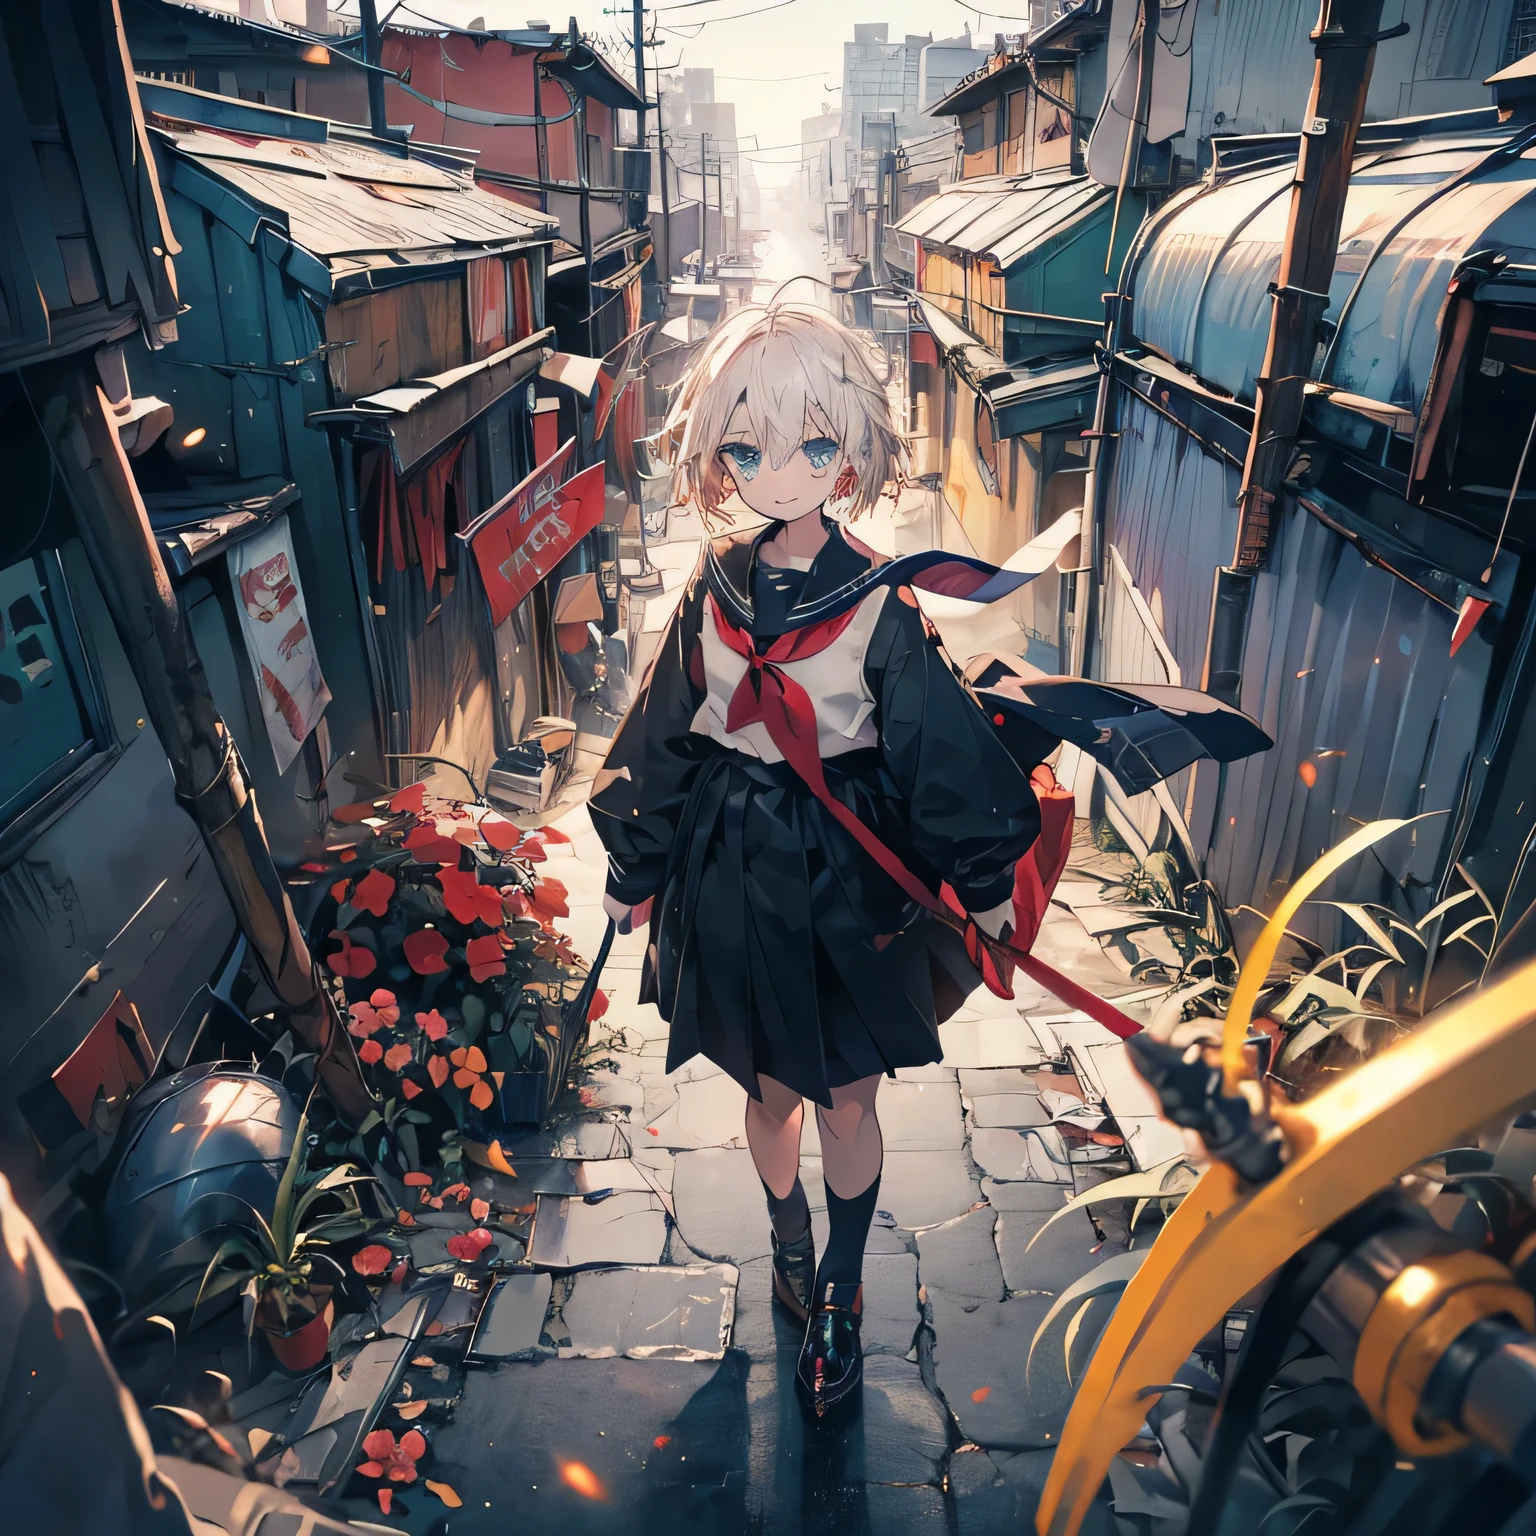 quality\(8k,wallpaper of extremely detailed CG unit, ​masterpiece,hight resolution,top-quality,top-quality real texture skin,hyper realisitic,increase the resolution,RAW photos,best qualtiy,highly detailed,the wallpaper,cinematic lighting,ray trace,golden ratio\), BREAK ,solo,1woman\(cute, kawaii,small kid,skin color white,pale skin,smile face,hair floating,hair color blond,short bob hair,eye color cosmic,big eyes,black sailor uniform,walking,view from above:1.8,long shot\),background\(outside,messy slum,view from above,long shot,long view\),(please generate hand correctry when generating hand)